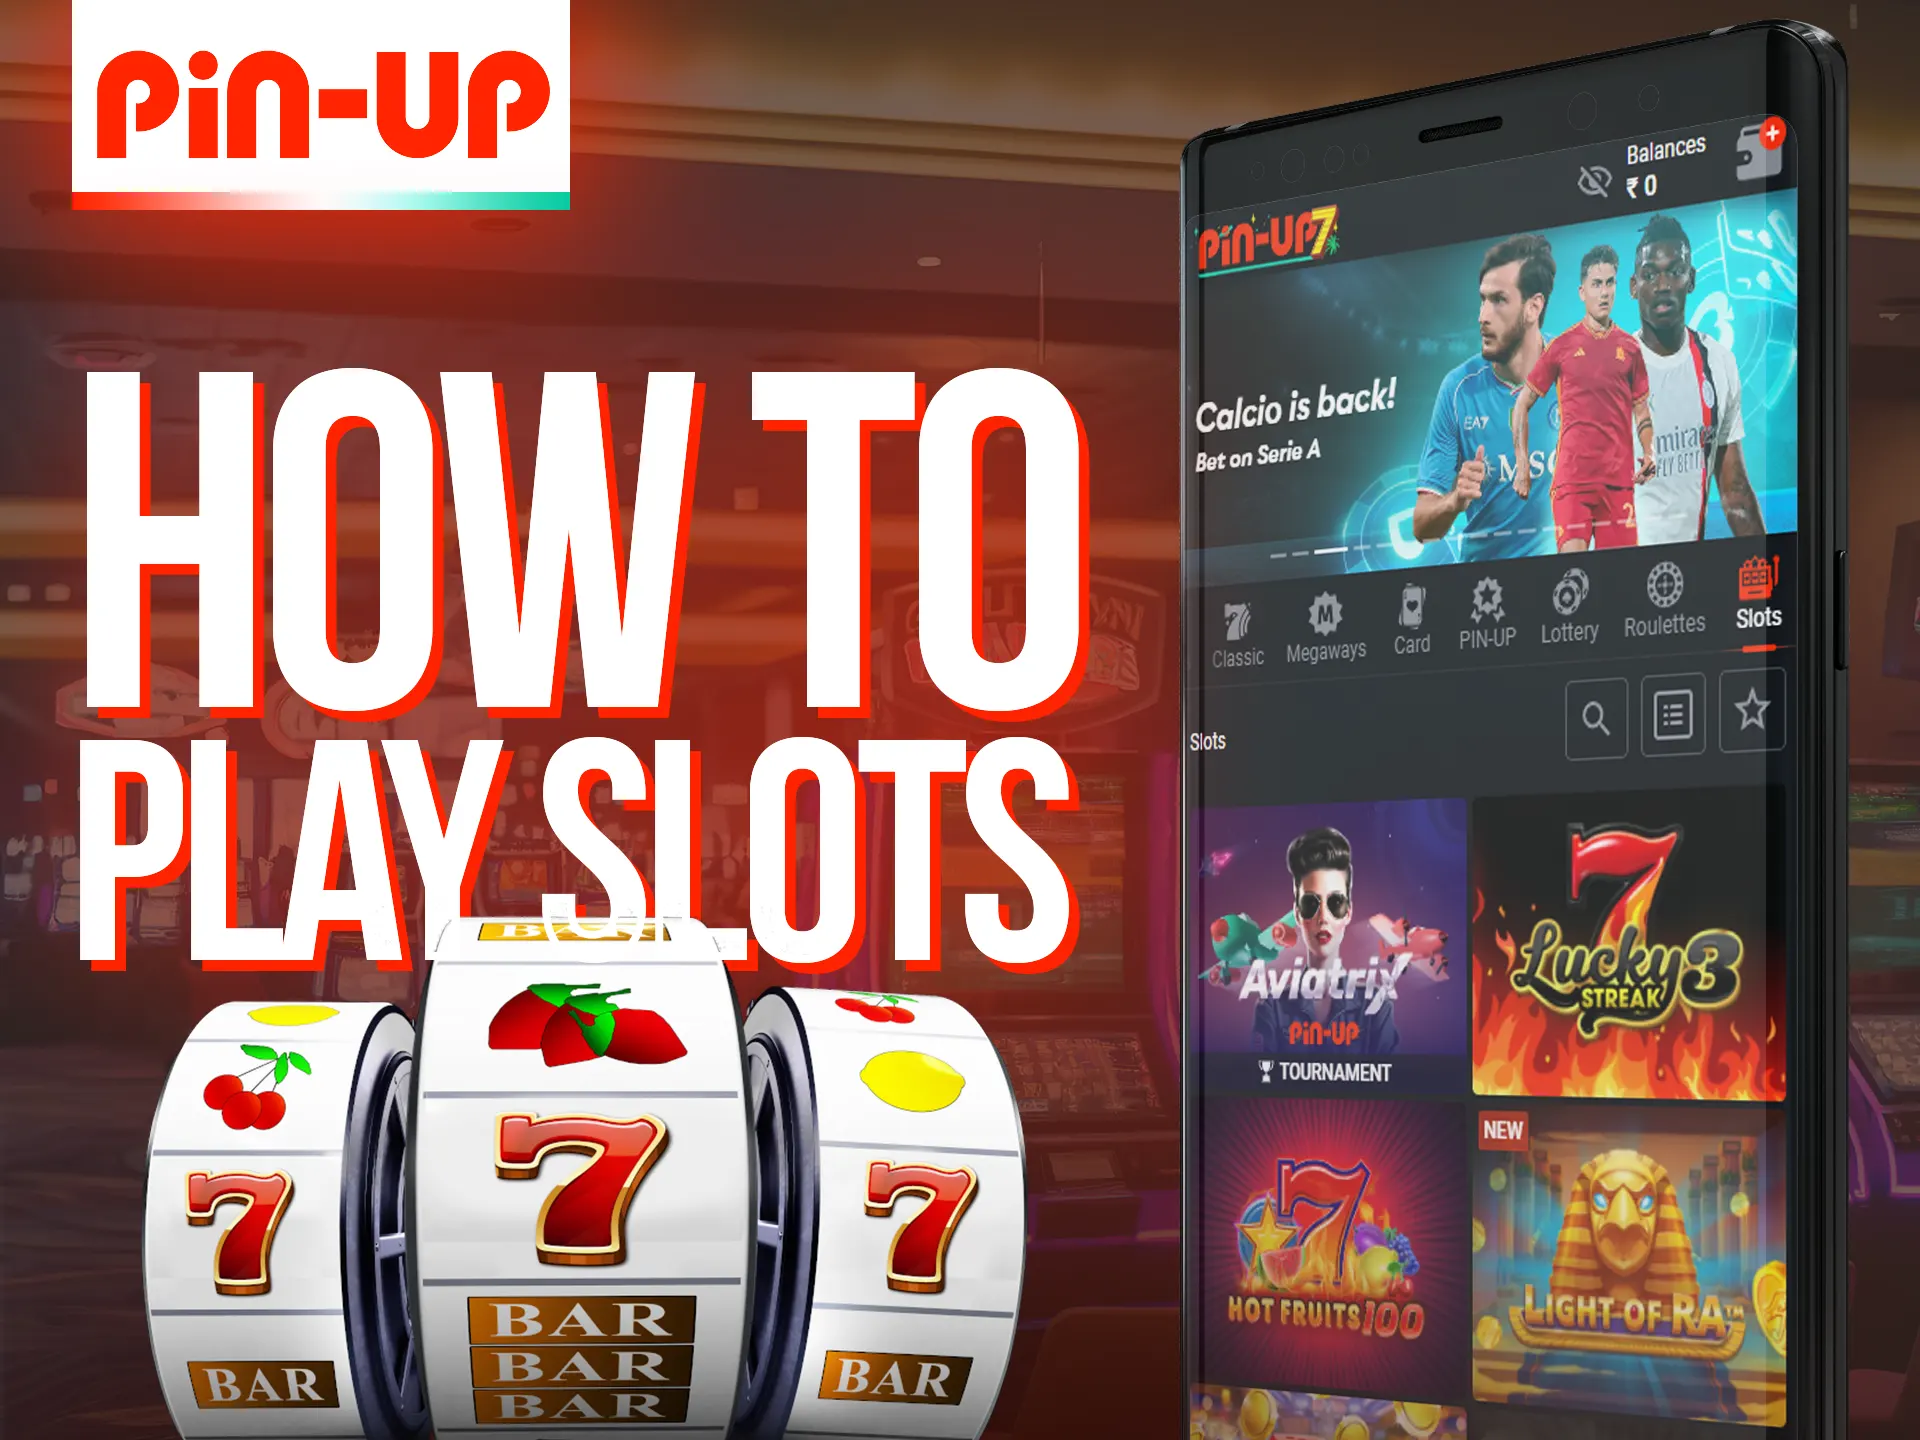 Learn how to play slots on the Pin-Up mobile app.